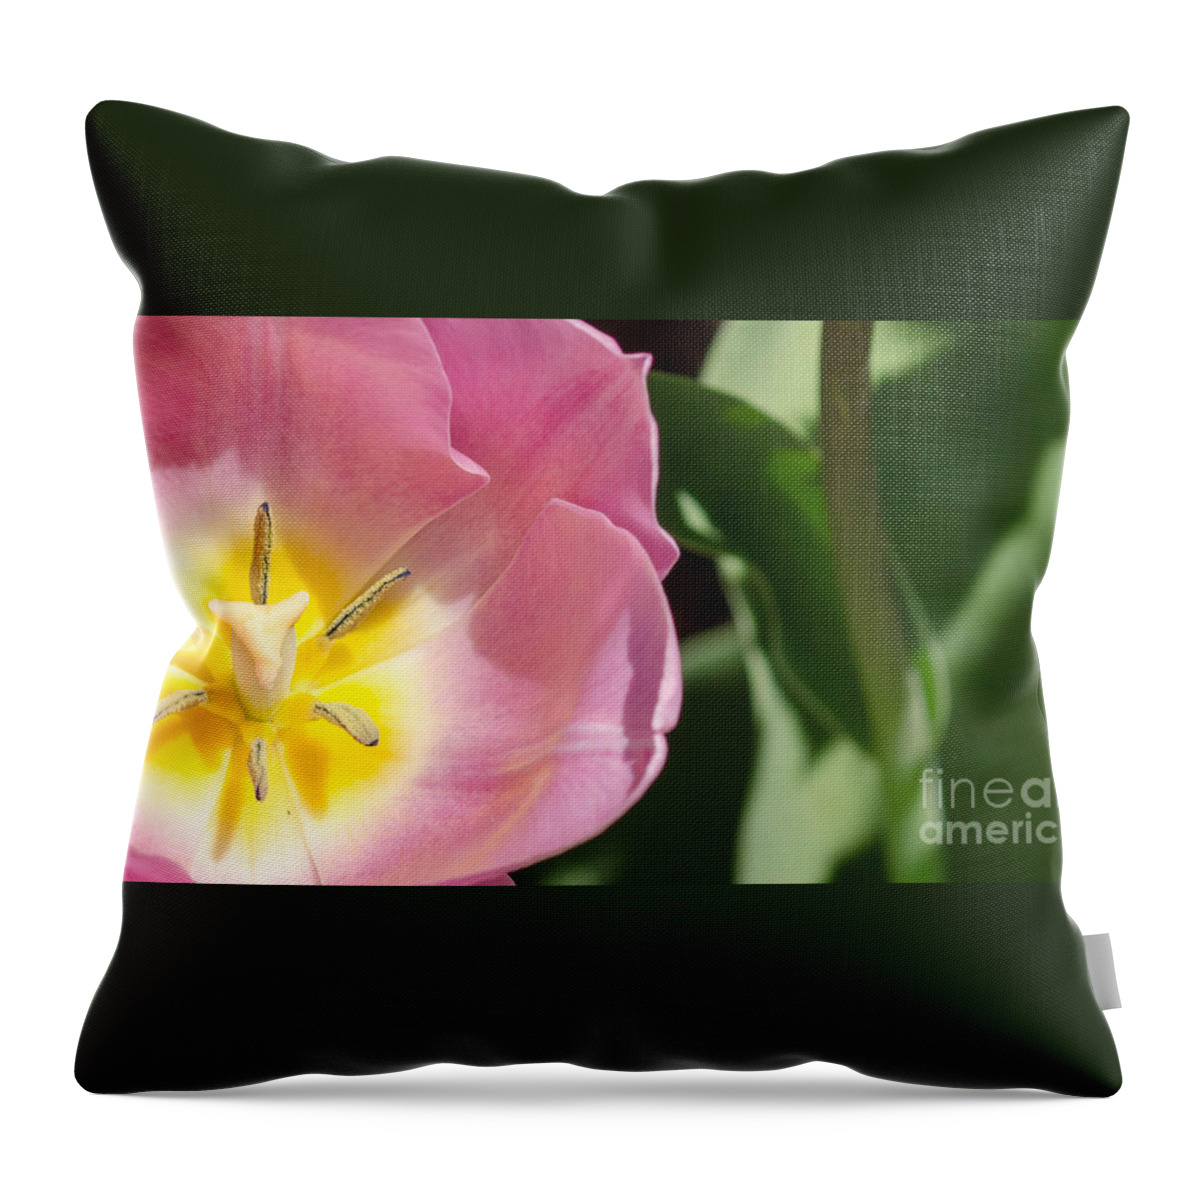 Flower Throw Pillow featuring the photograph Pink Tulip by Andrea Anderegg